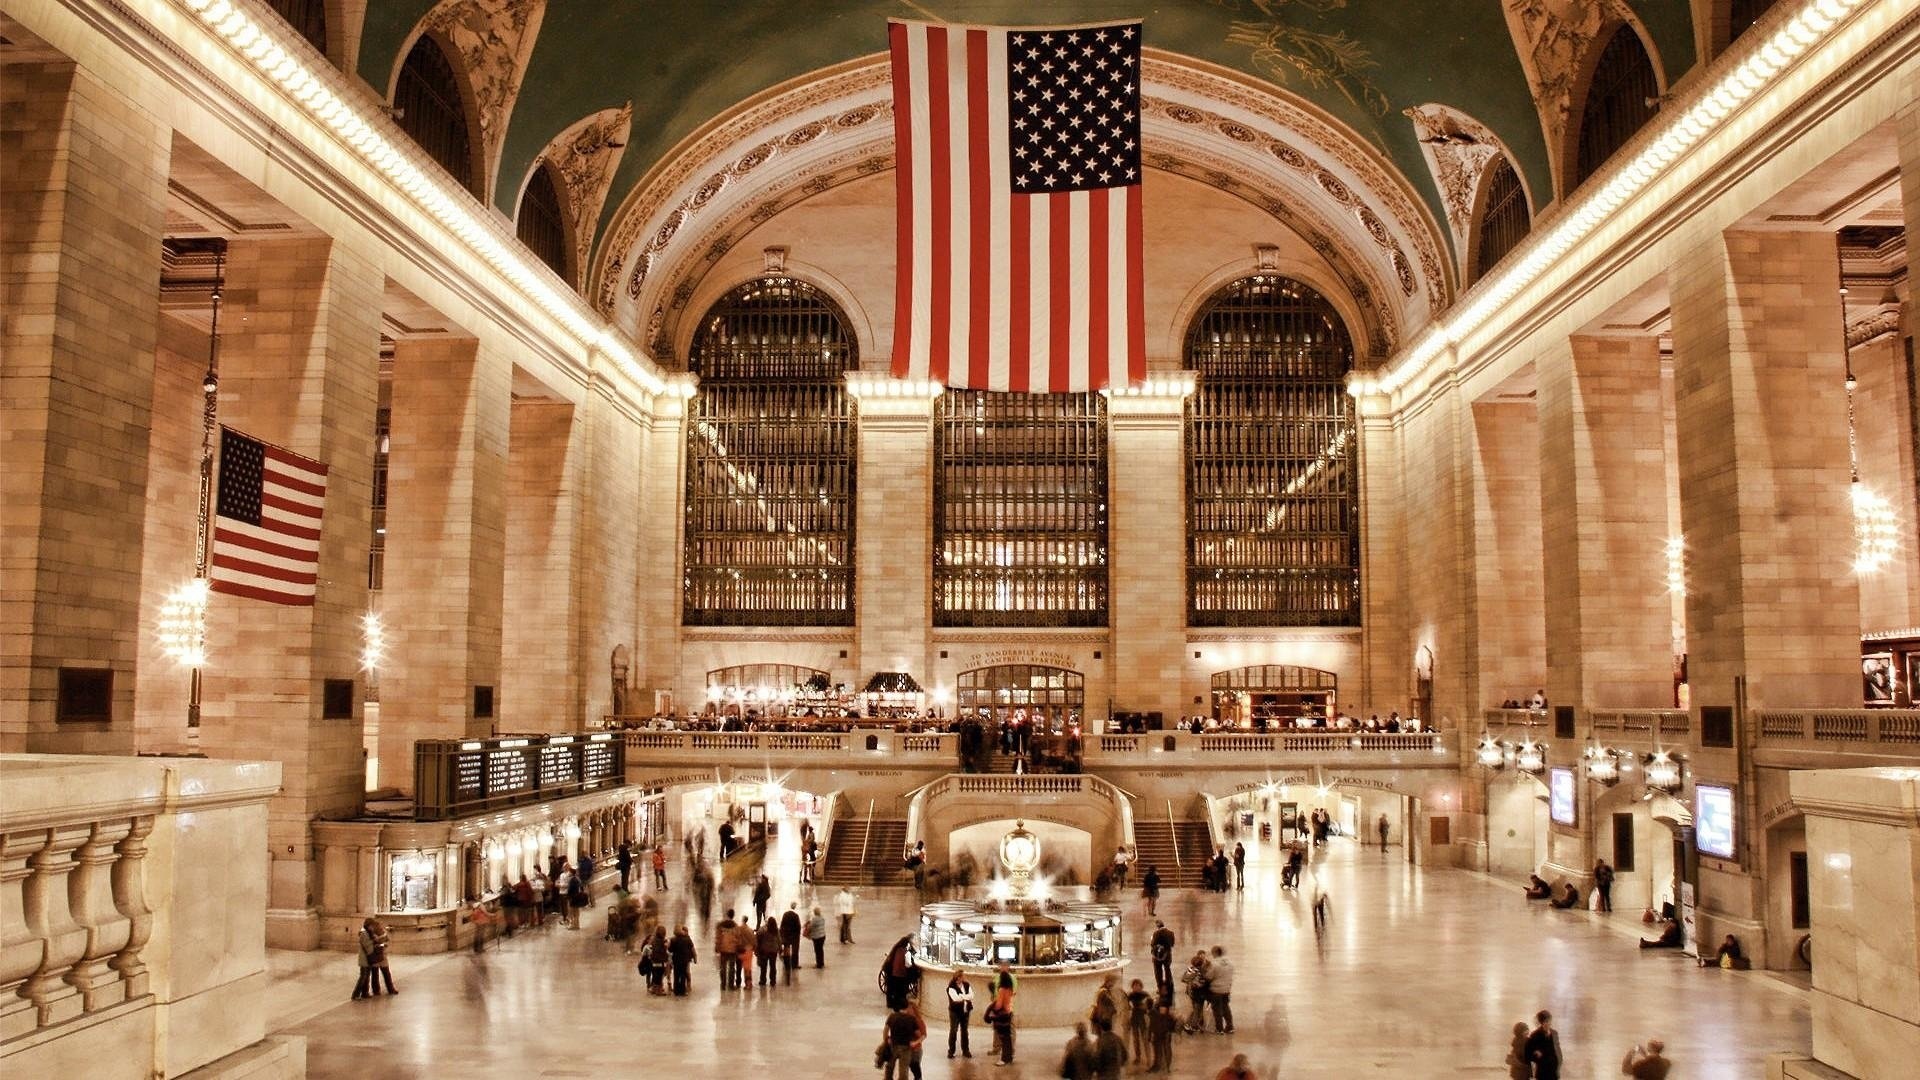 Grand Central Station, NYC, HD wallpapers, Background images, 1920x1080 Full HD Desktop